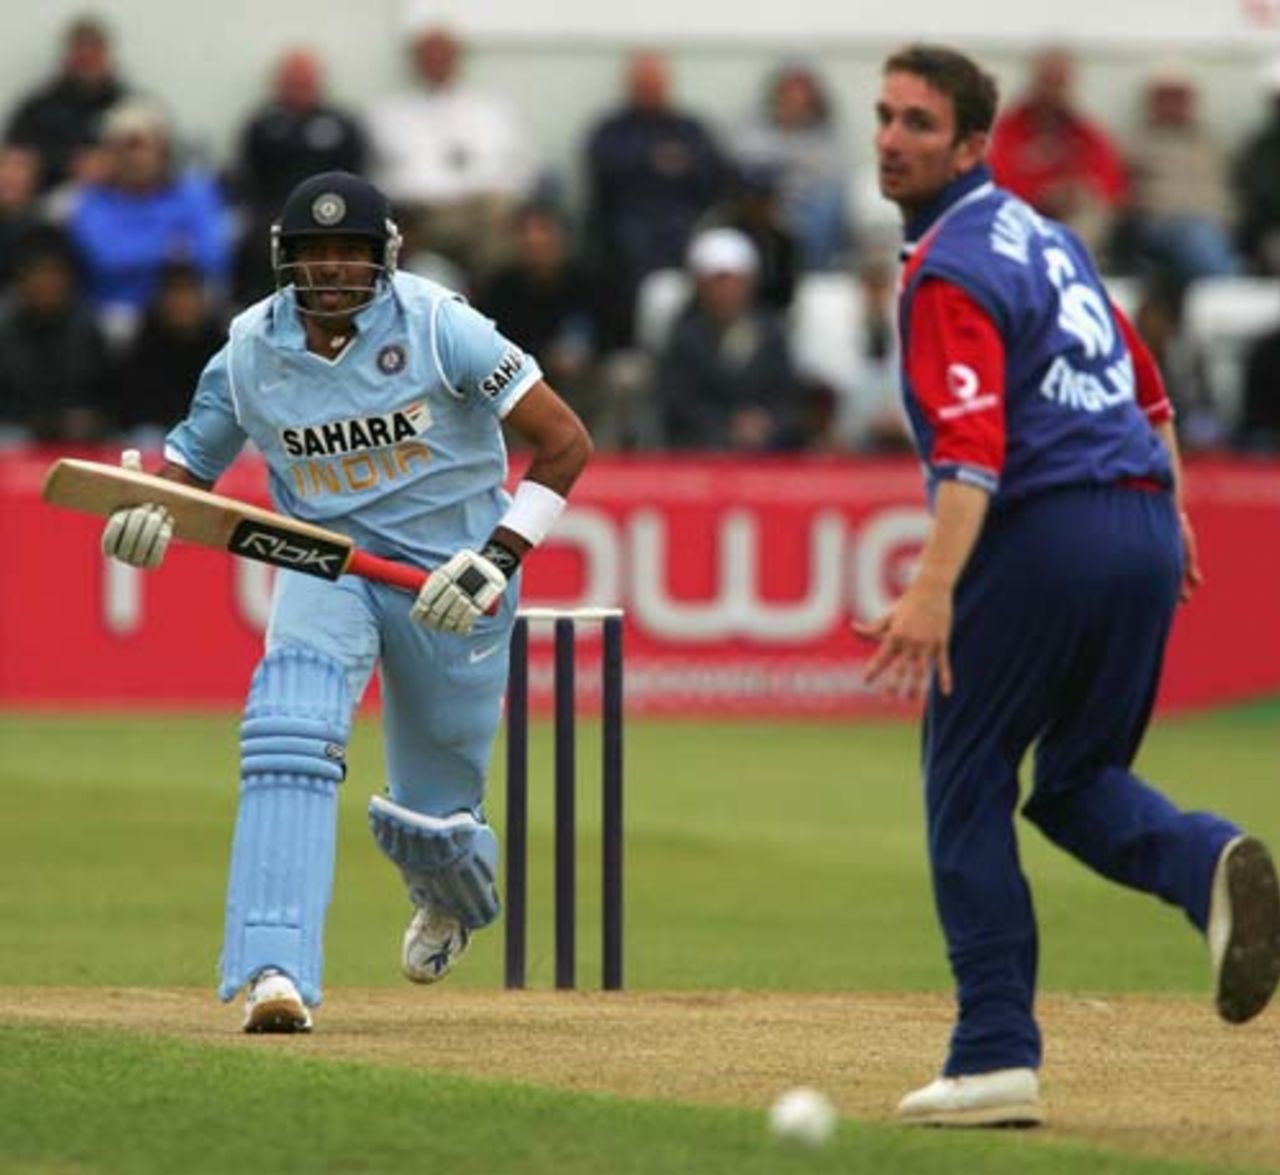 Robin Uthappa takes off for a single as James Kirtley looks on, England Lions v Indians, ODI warm-up, Northampton, August 18, 2007